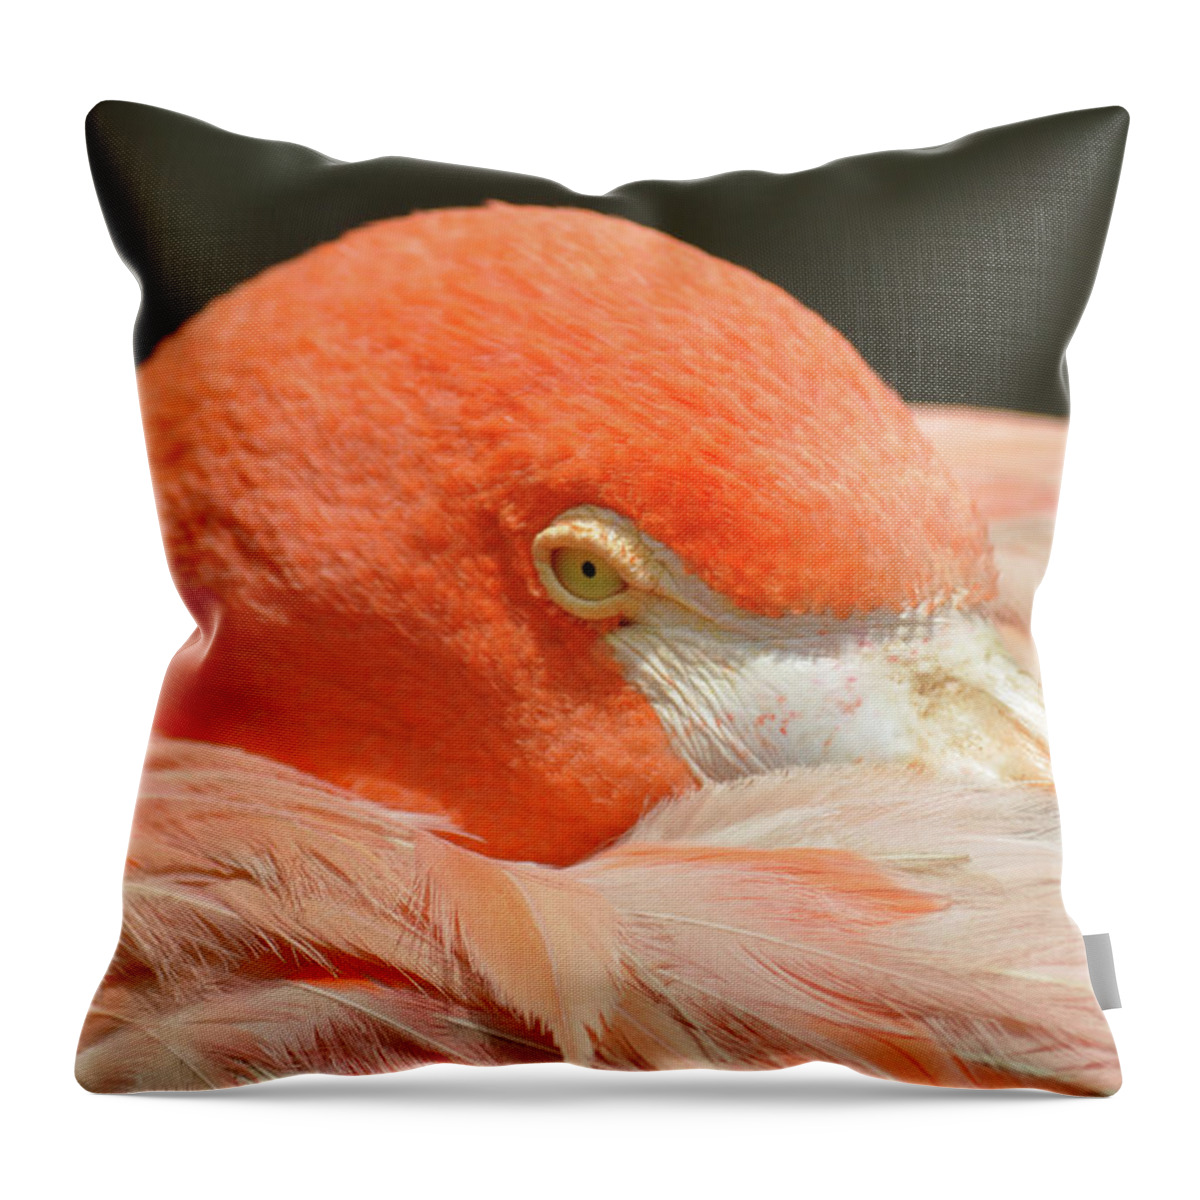 Animal Themes Throw Pillow featuring the photograph Flamingo Resting by By Eugenio Carrer São Paulo Brazil